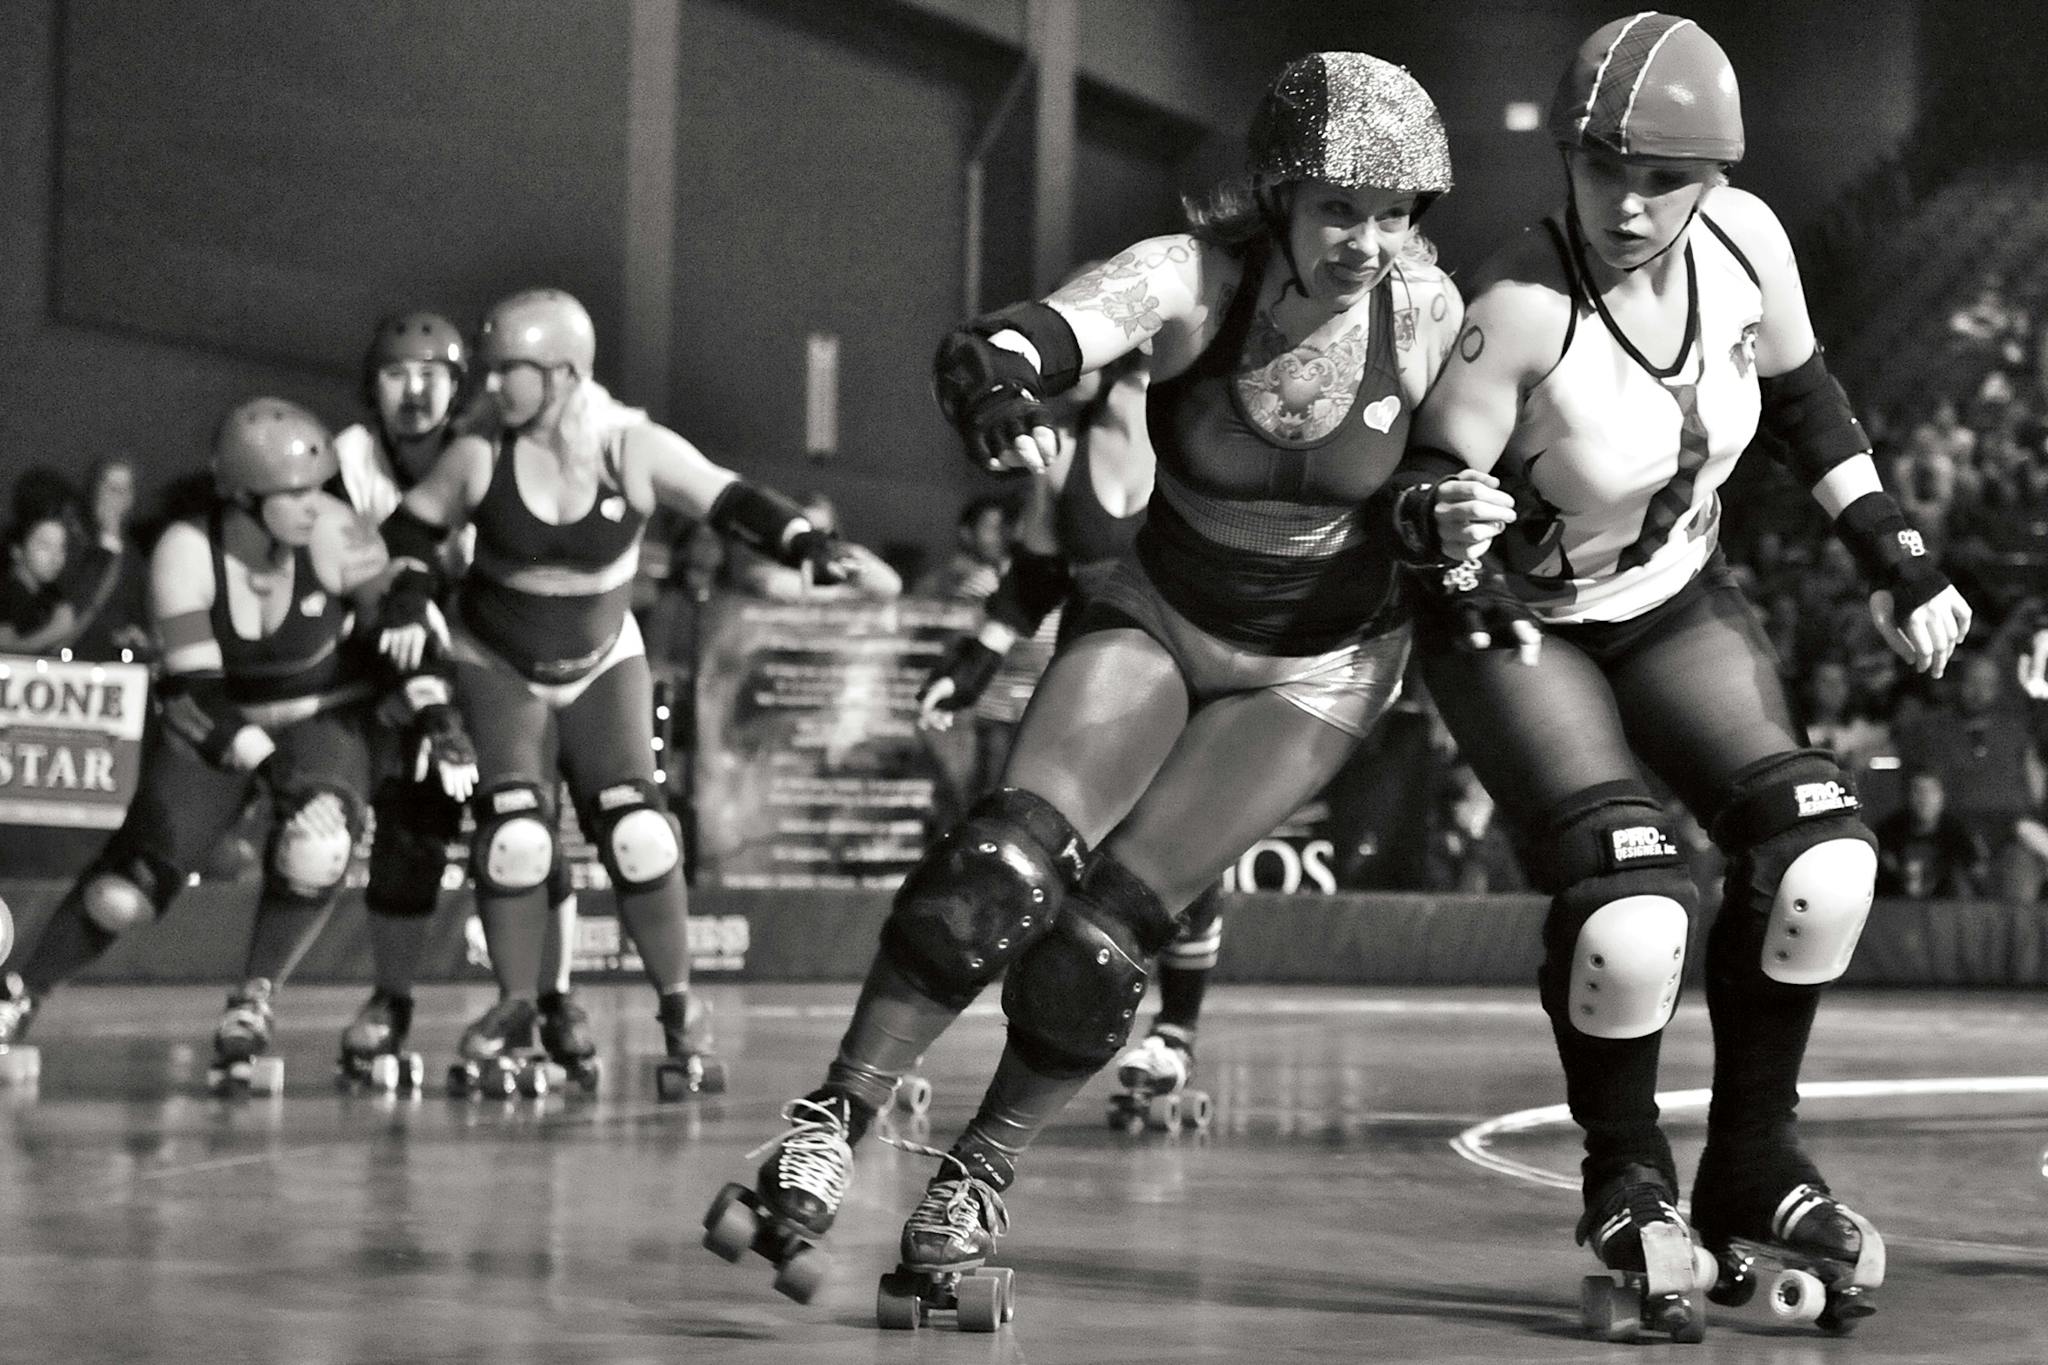 Hot Box face off against Notorious D.I.E., another team in the Texas Rollergirls league, in Austin in 2011.